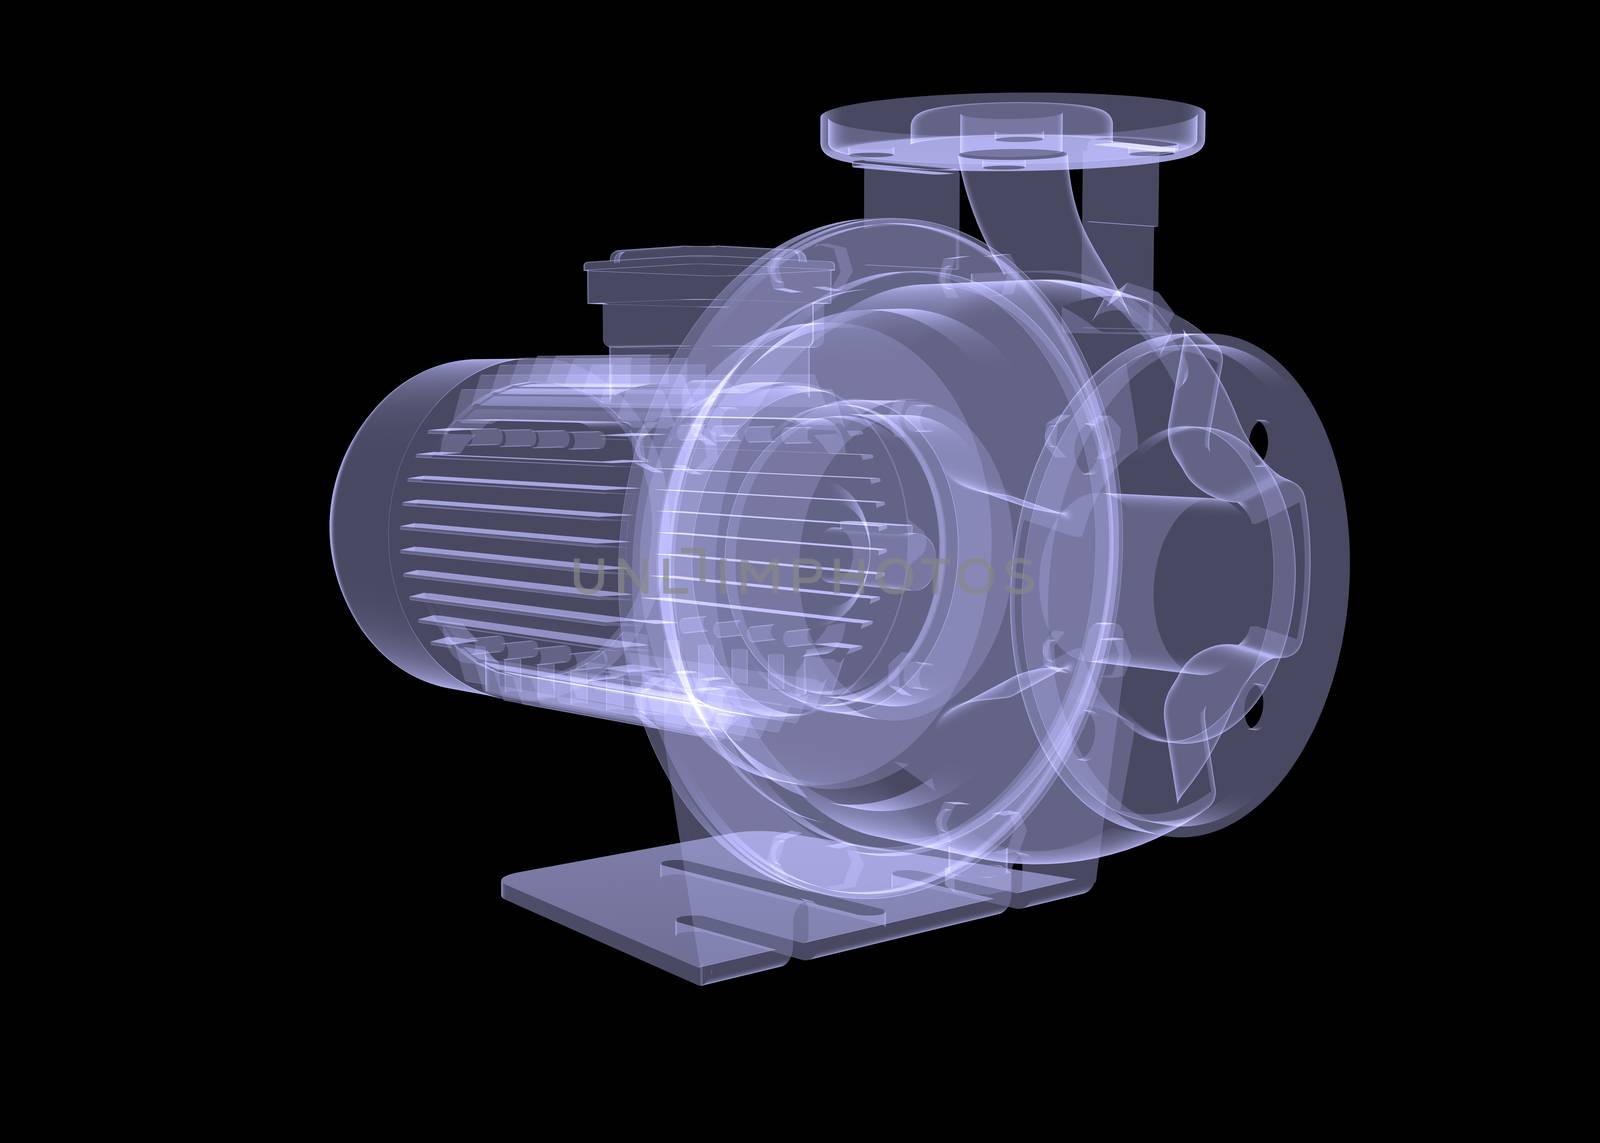 Water pump motor. X-ray isolated render on black background